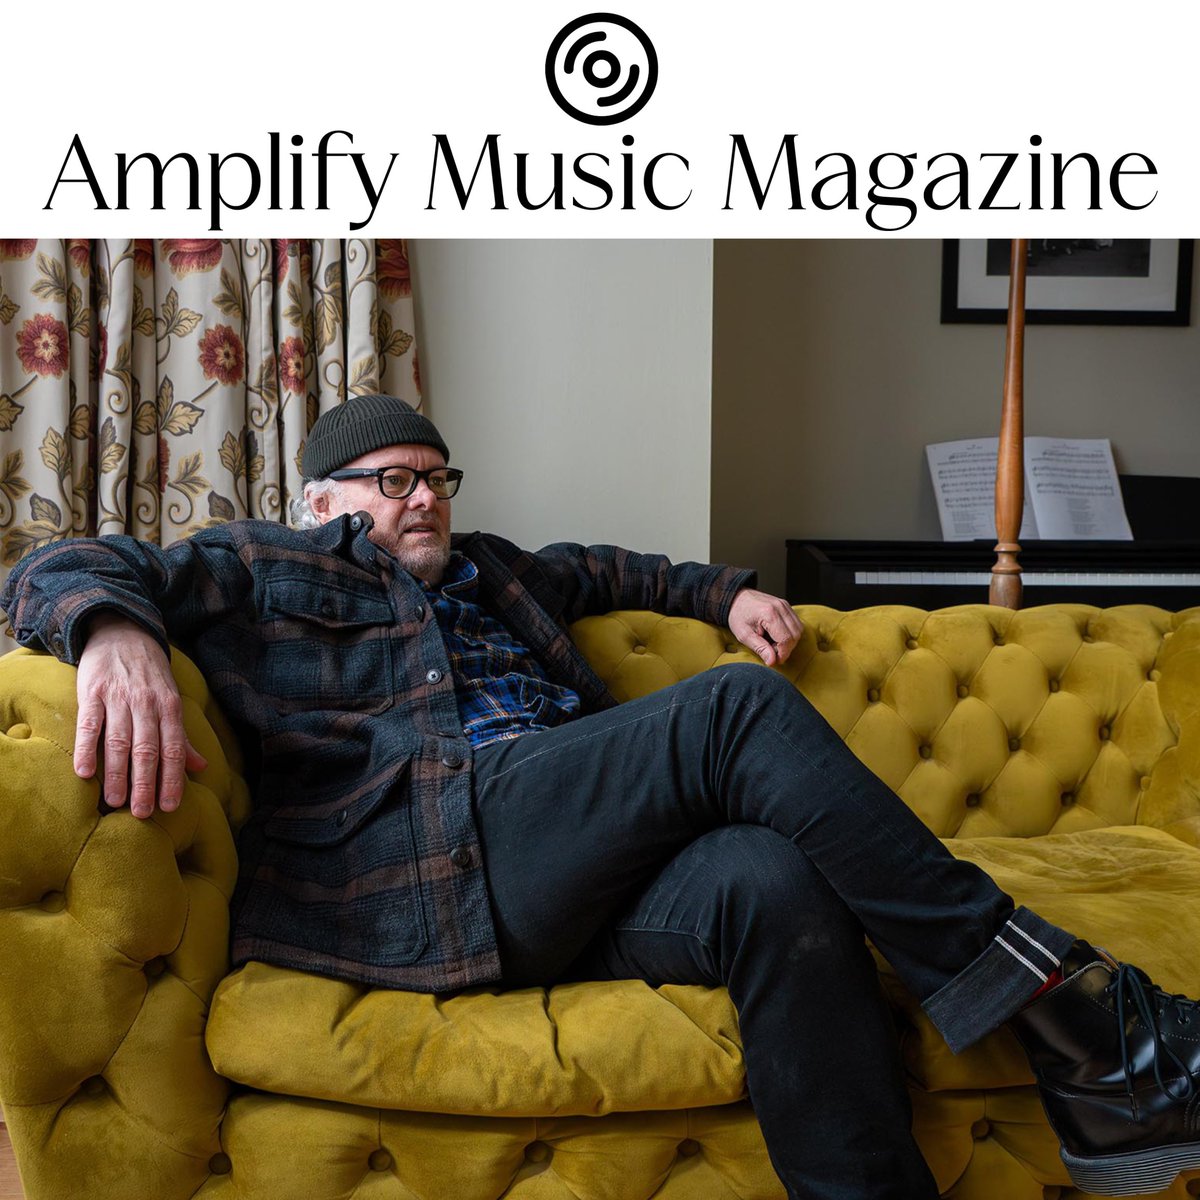 'Superbly composed and engineered, the beautiful lulling' 'Wipe Out The Stars' from @boulder_fields awaits via @AmplifyMusicMag, with thoughts and the full rundown on the Edinburgh troubadour's latest offering ~ tinyurl.com/bf-amplify @MusikScottish @ScotsPostPunk @reSOUNDonline